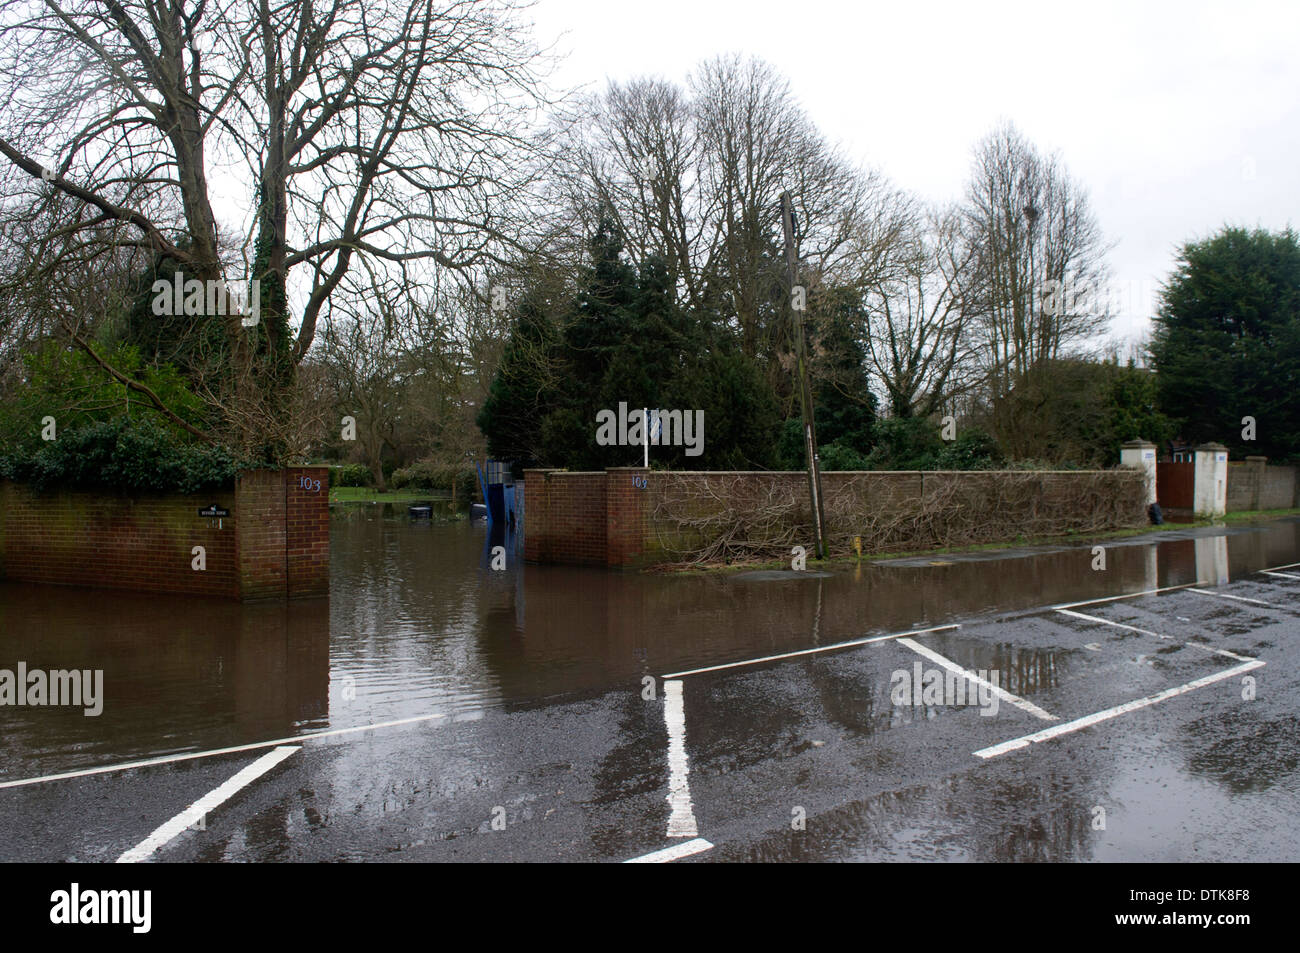 Flooded residential area and park in Staines. Driveway and streets flooded. Stock Photo